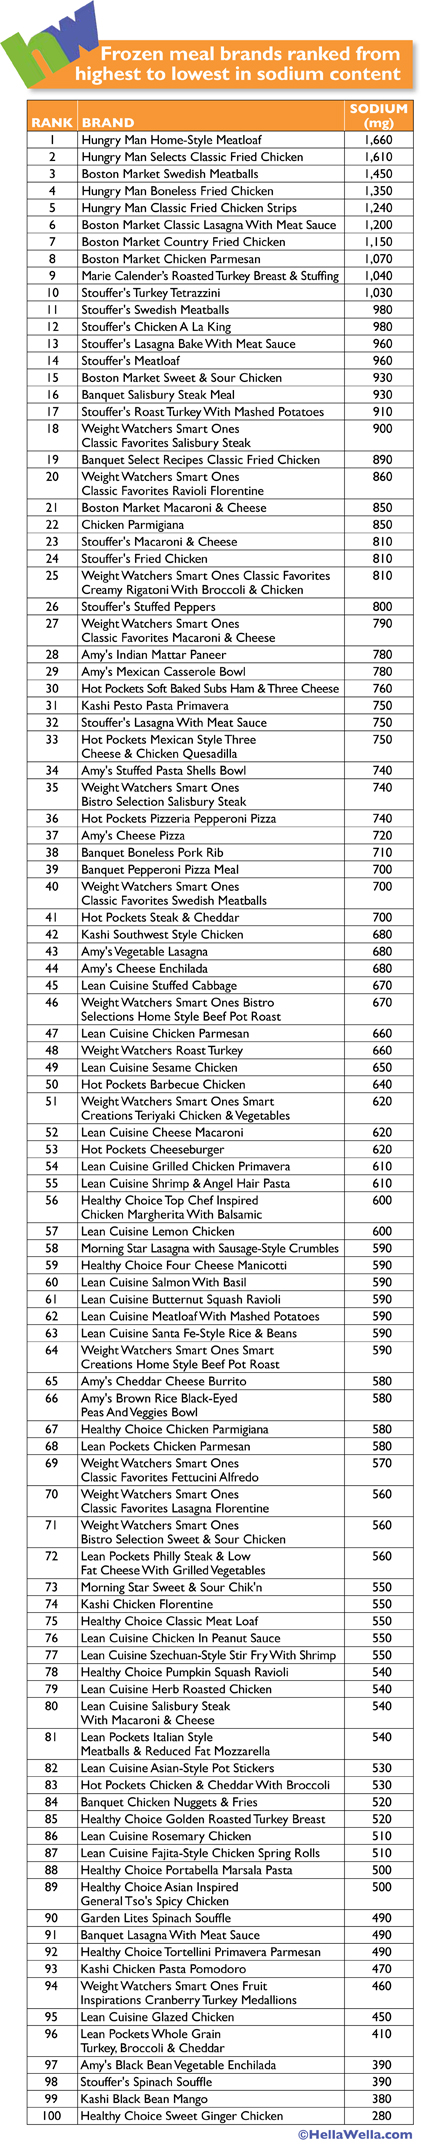 100-popular-frozen-meals-ranked-by-sodium-content